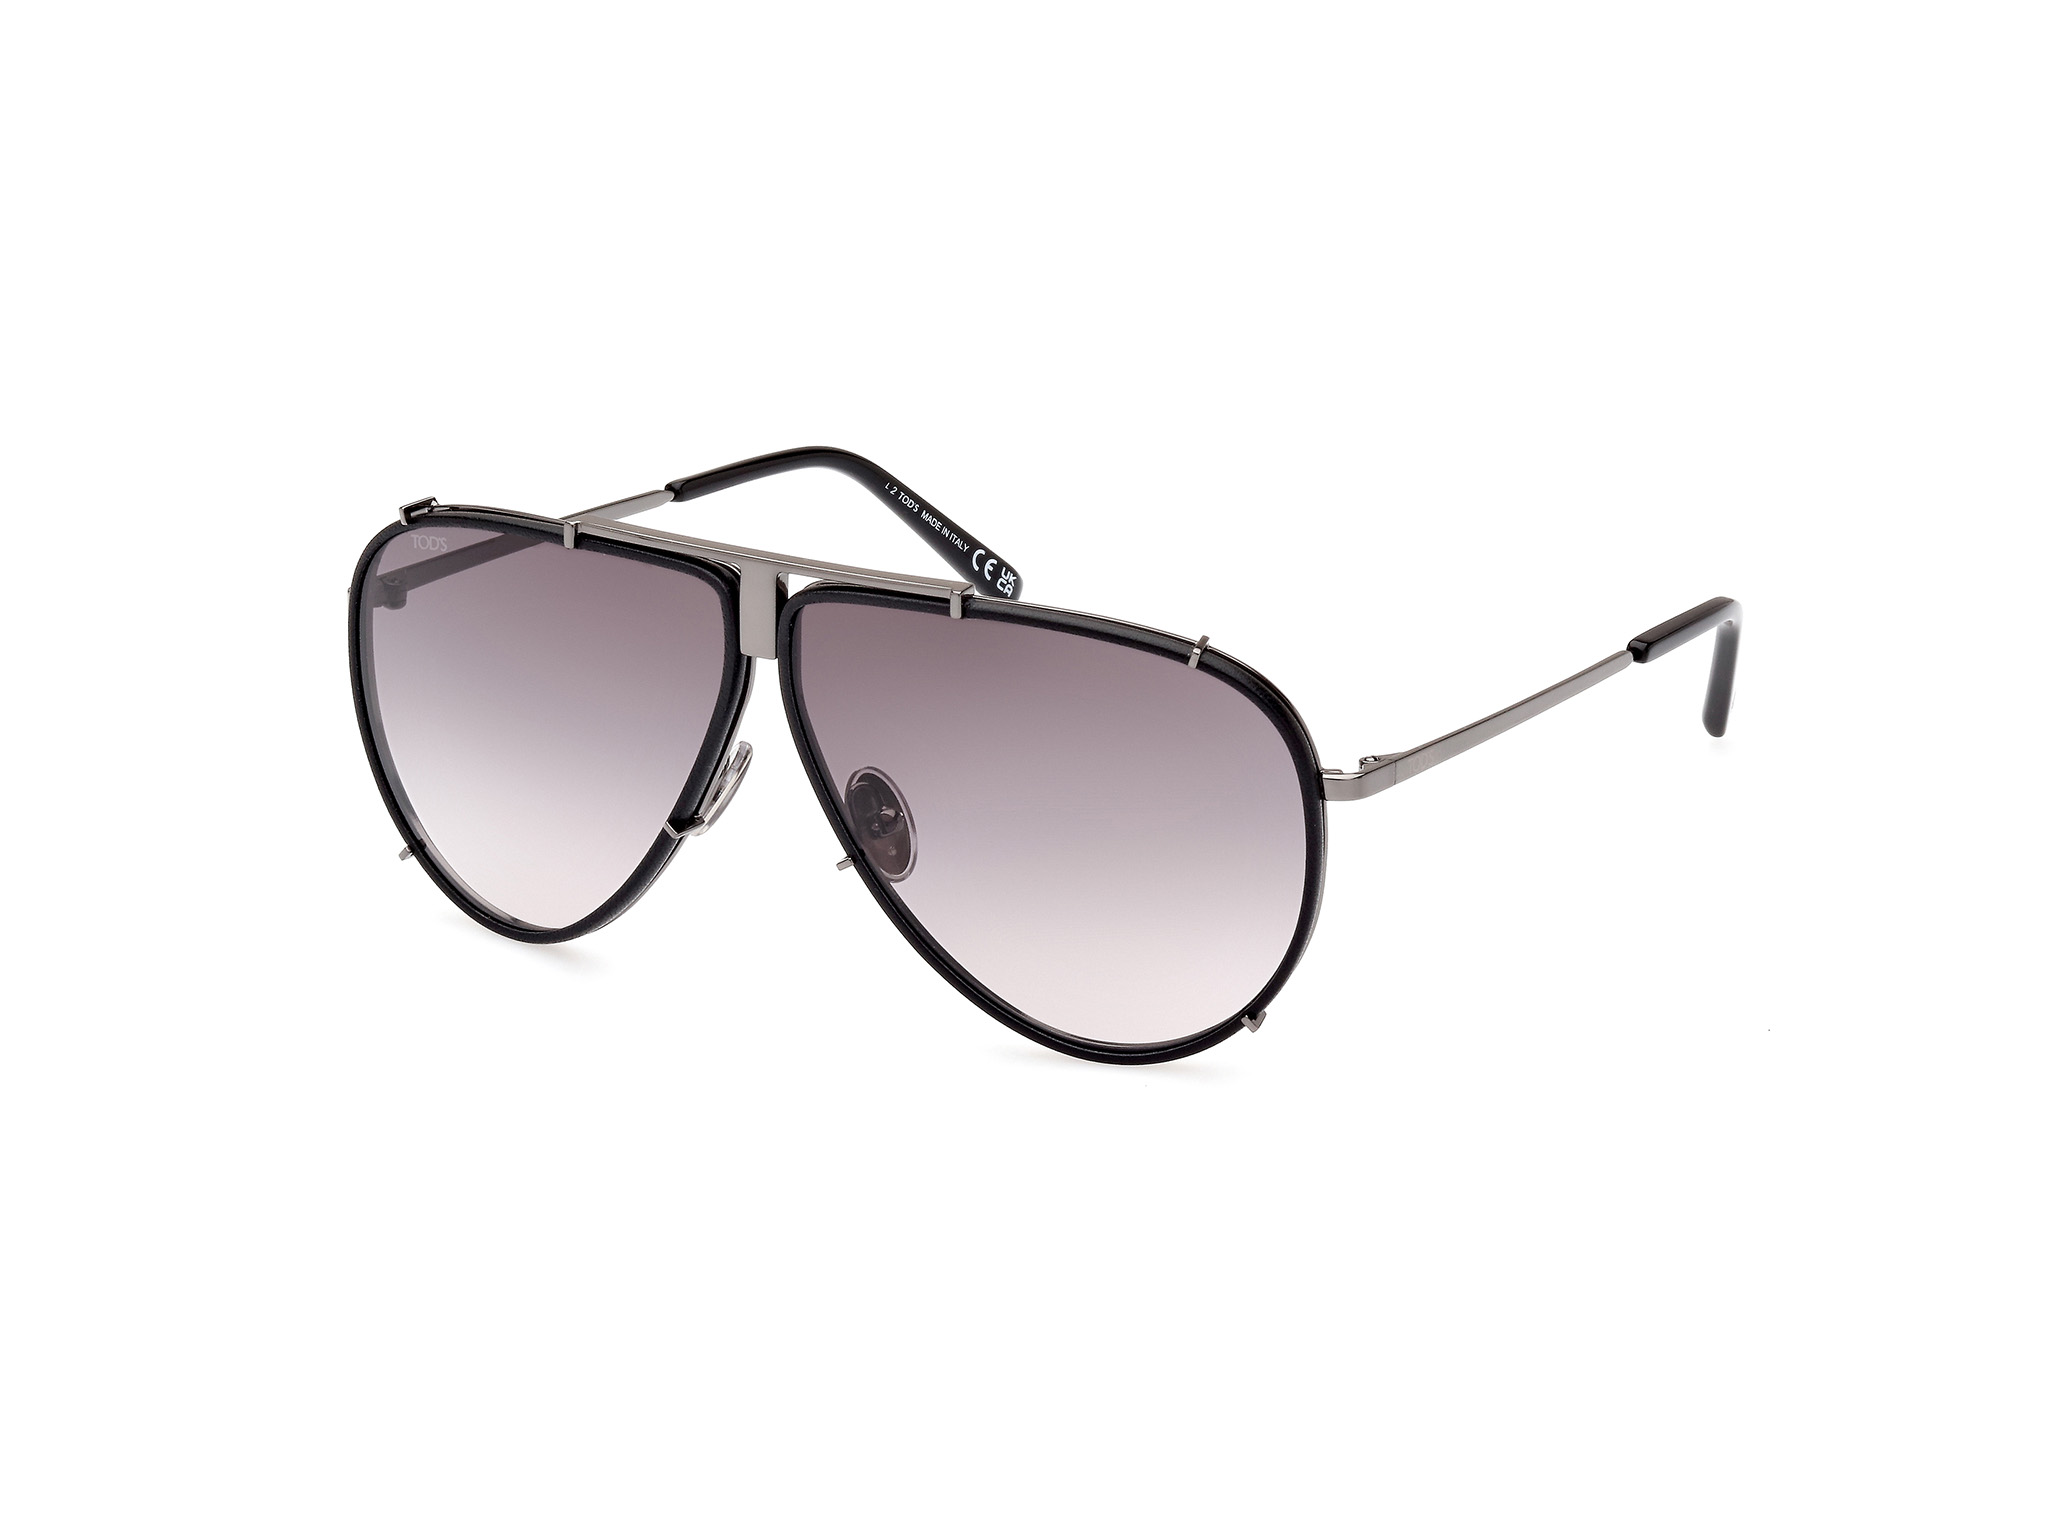 Tod's Eyewear Collection - Marcolin